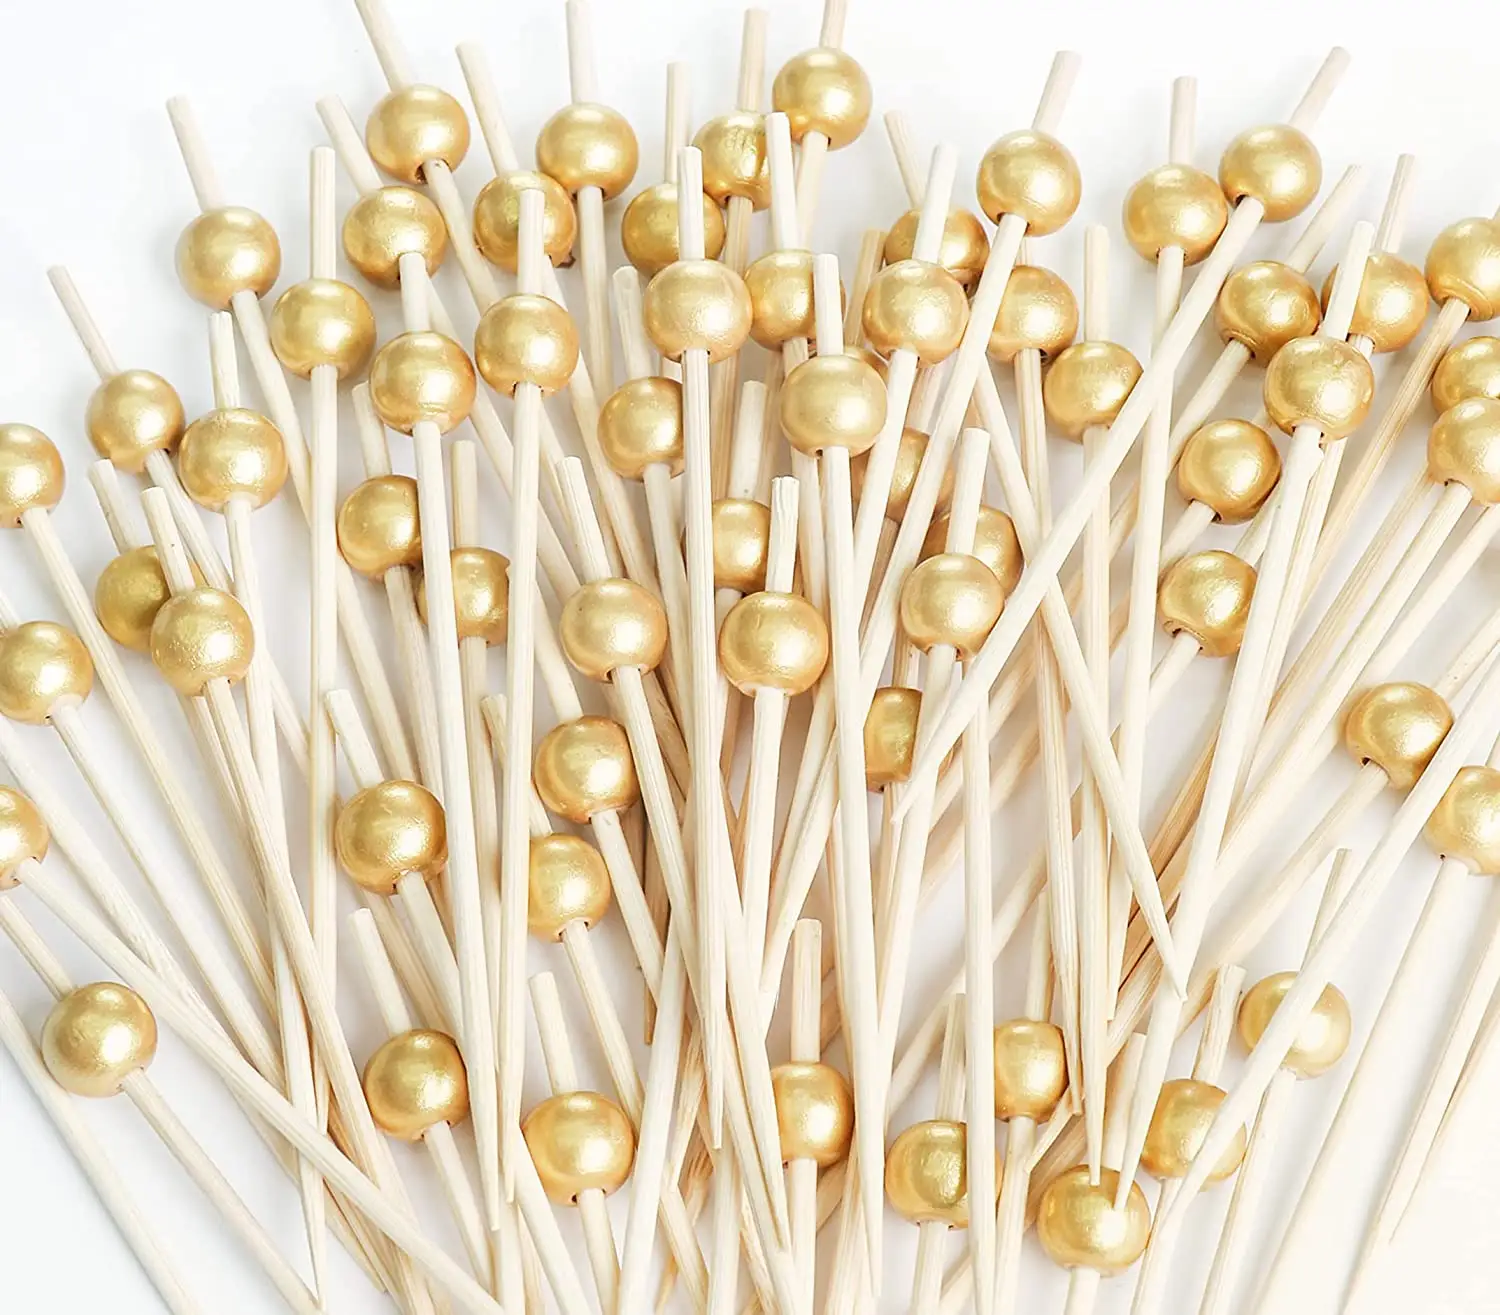 Wholesale Fancy Cocktail Toothpicks Picks Handmade Bamboo Cocktail Skewers With Gold Pearl Food Picks Charcuterie Accessories